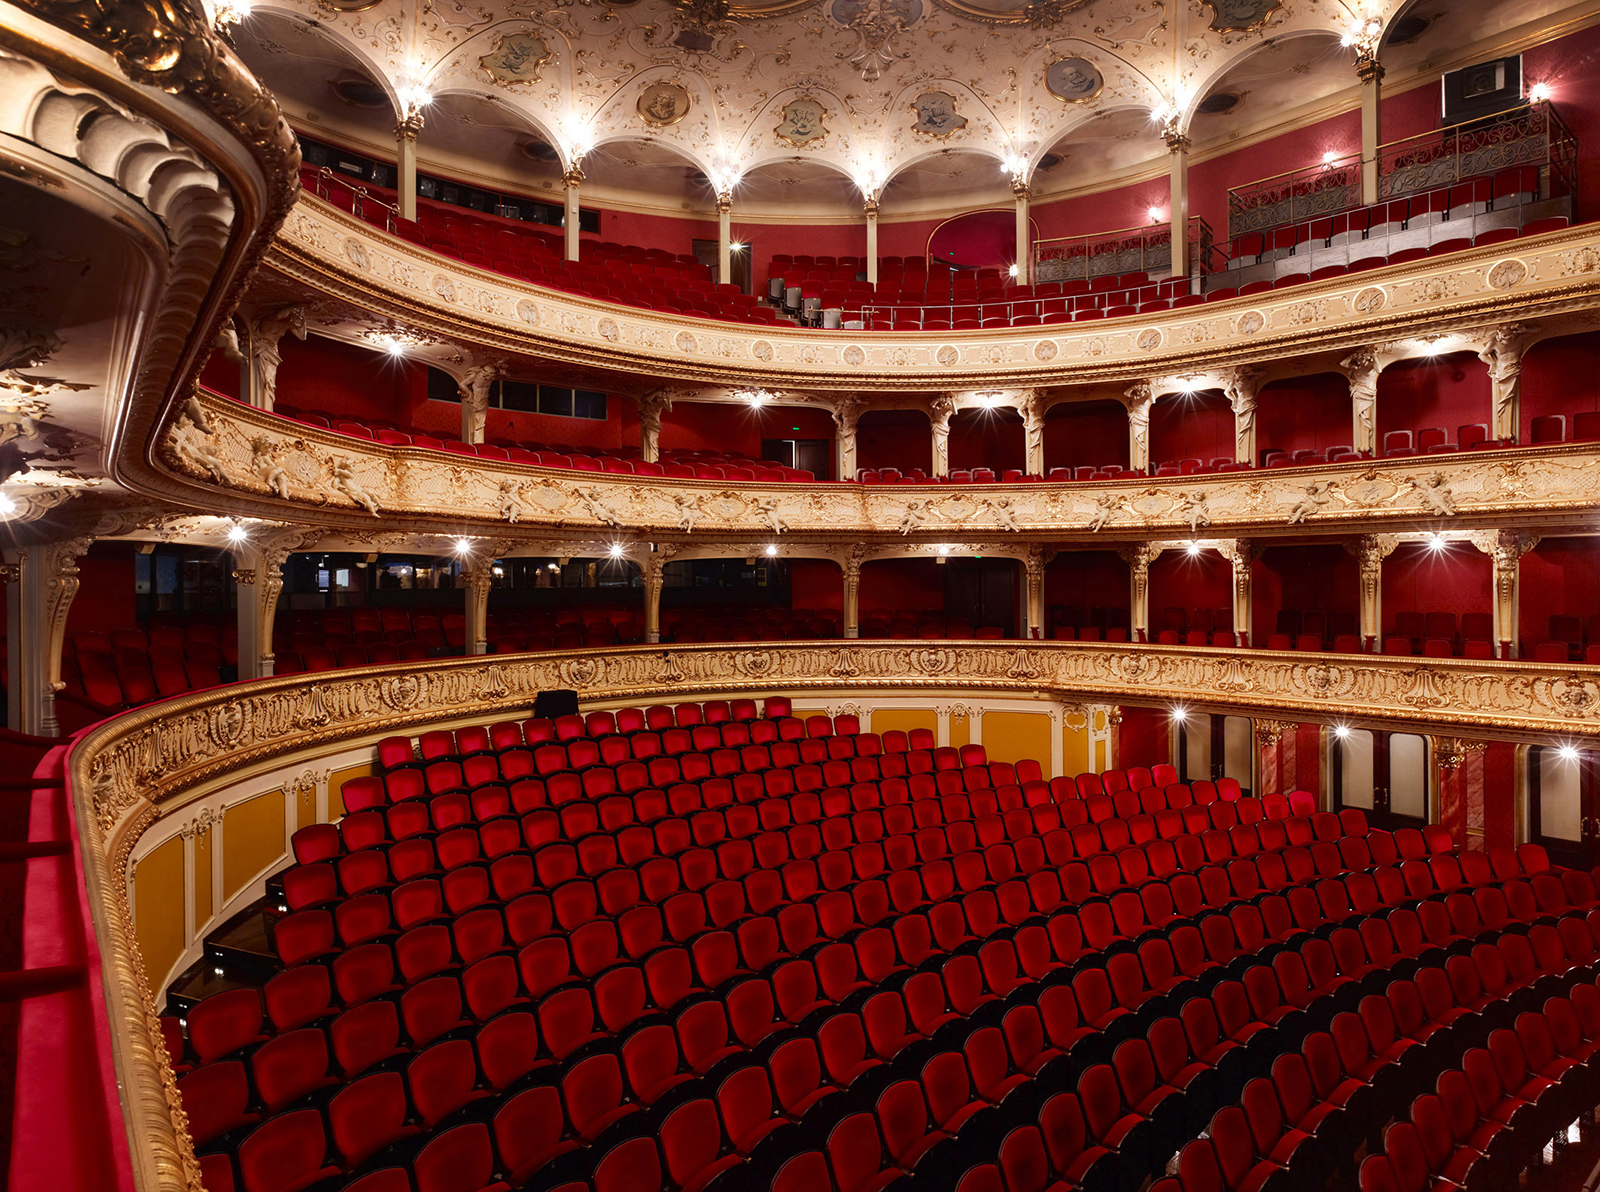 The Zurich Opera dates back to 1891. It was originally conceived as a legitimate theater and has several levels.